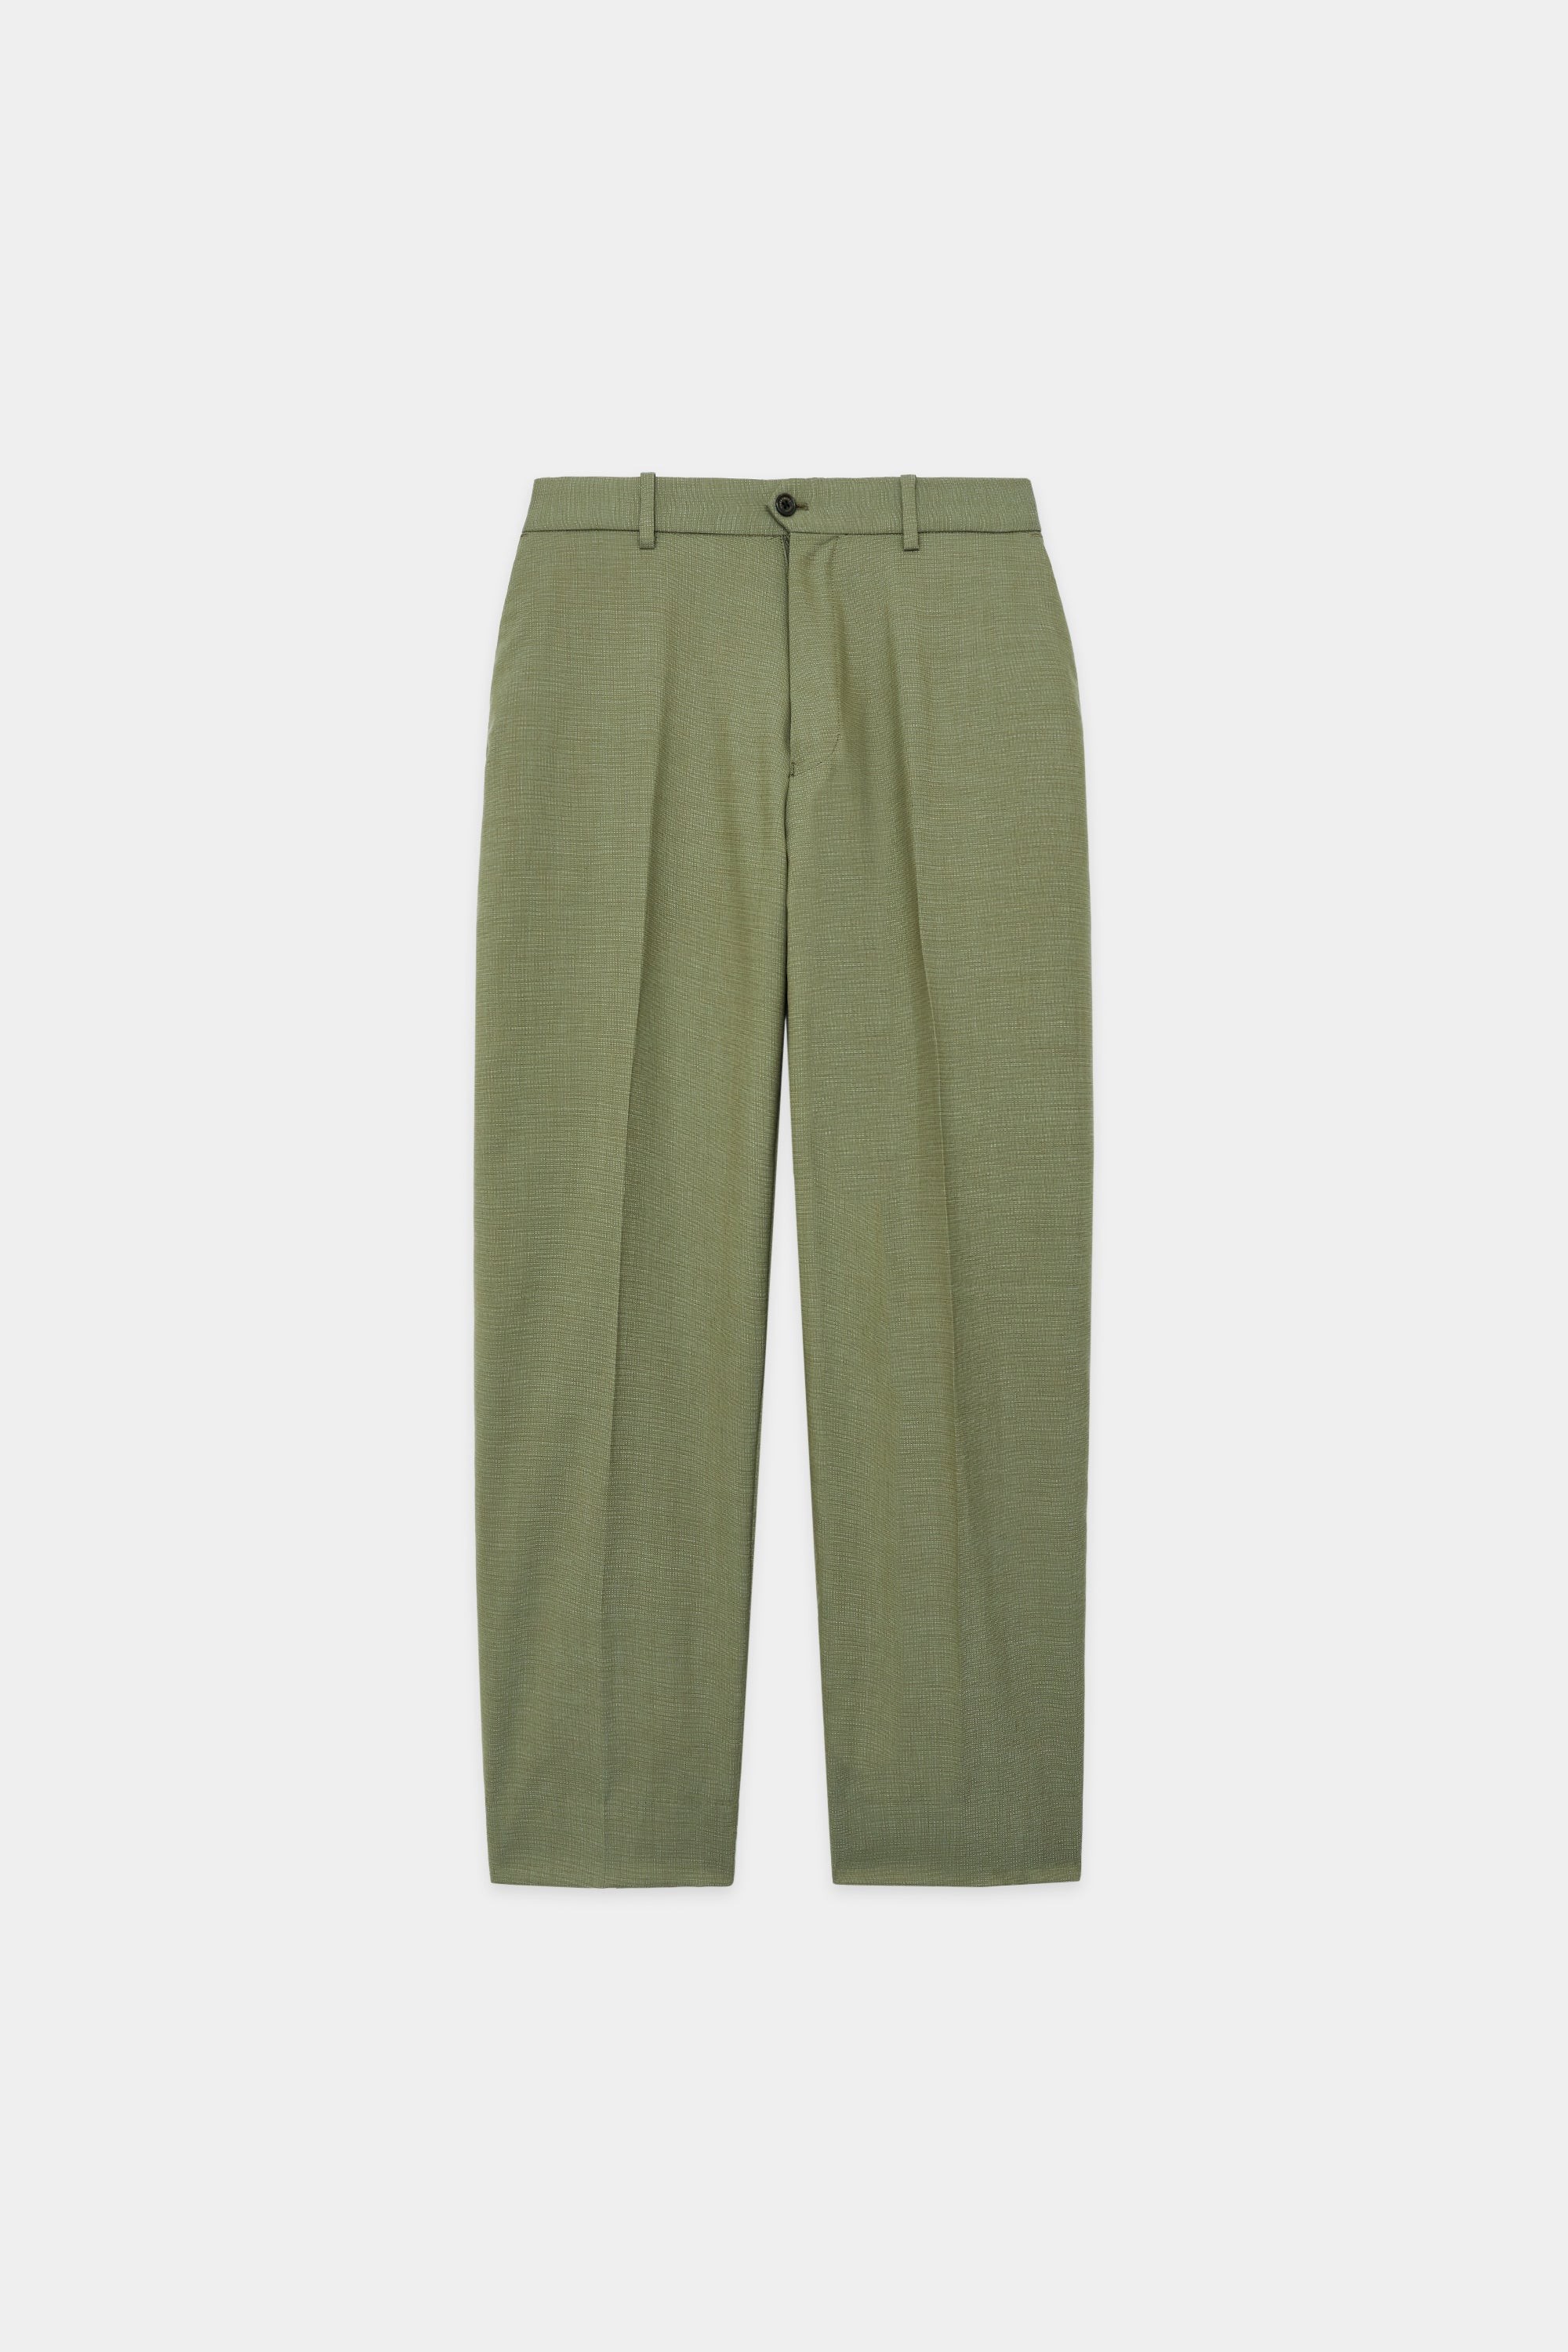 Markaware TROPICAL FLAT FRONT TROUSERS - チノパン